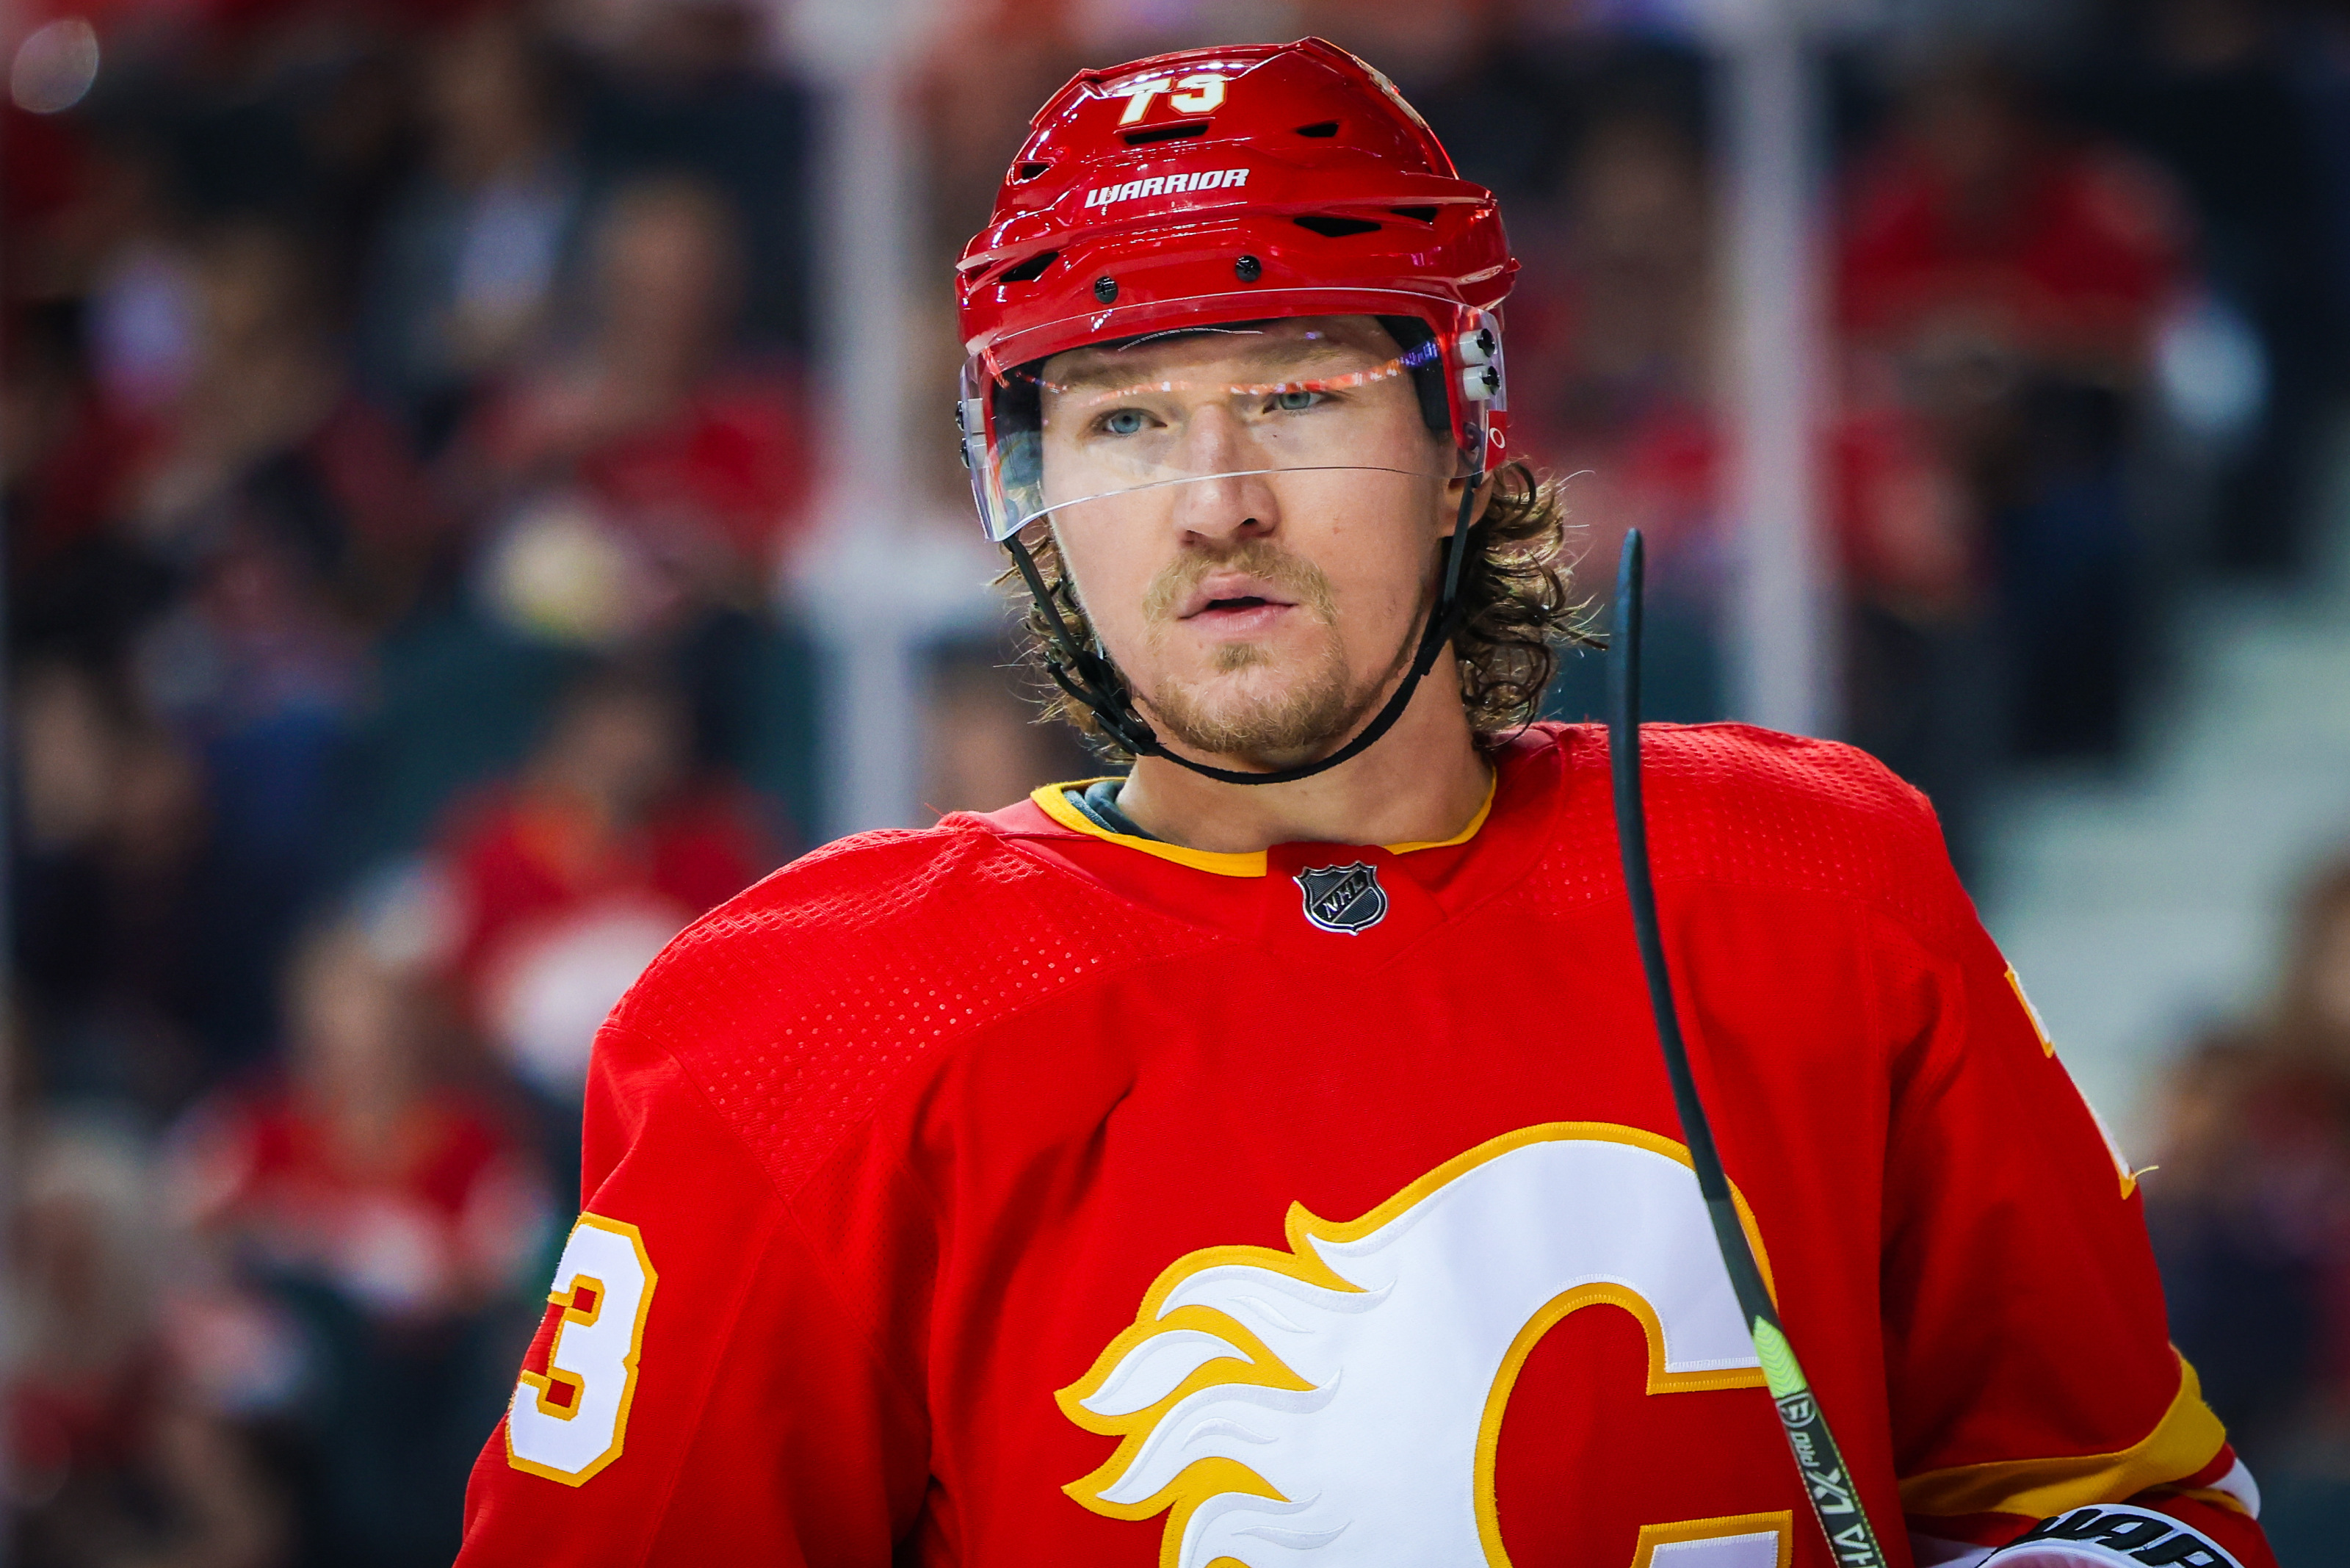 Why did Tyler Toffoli change his mind about Calgary? 